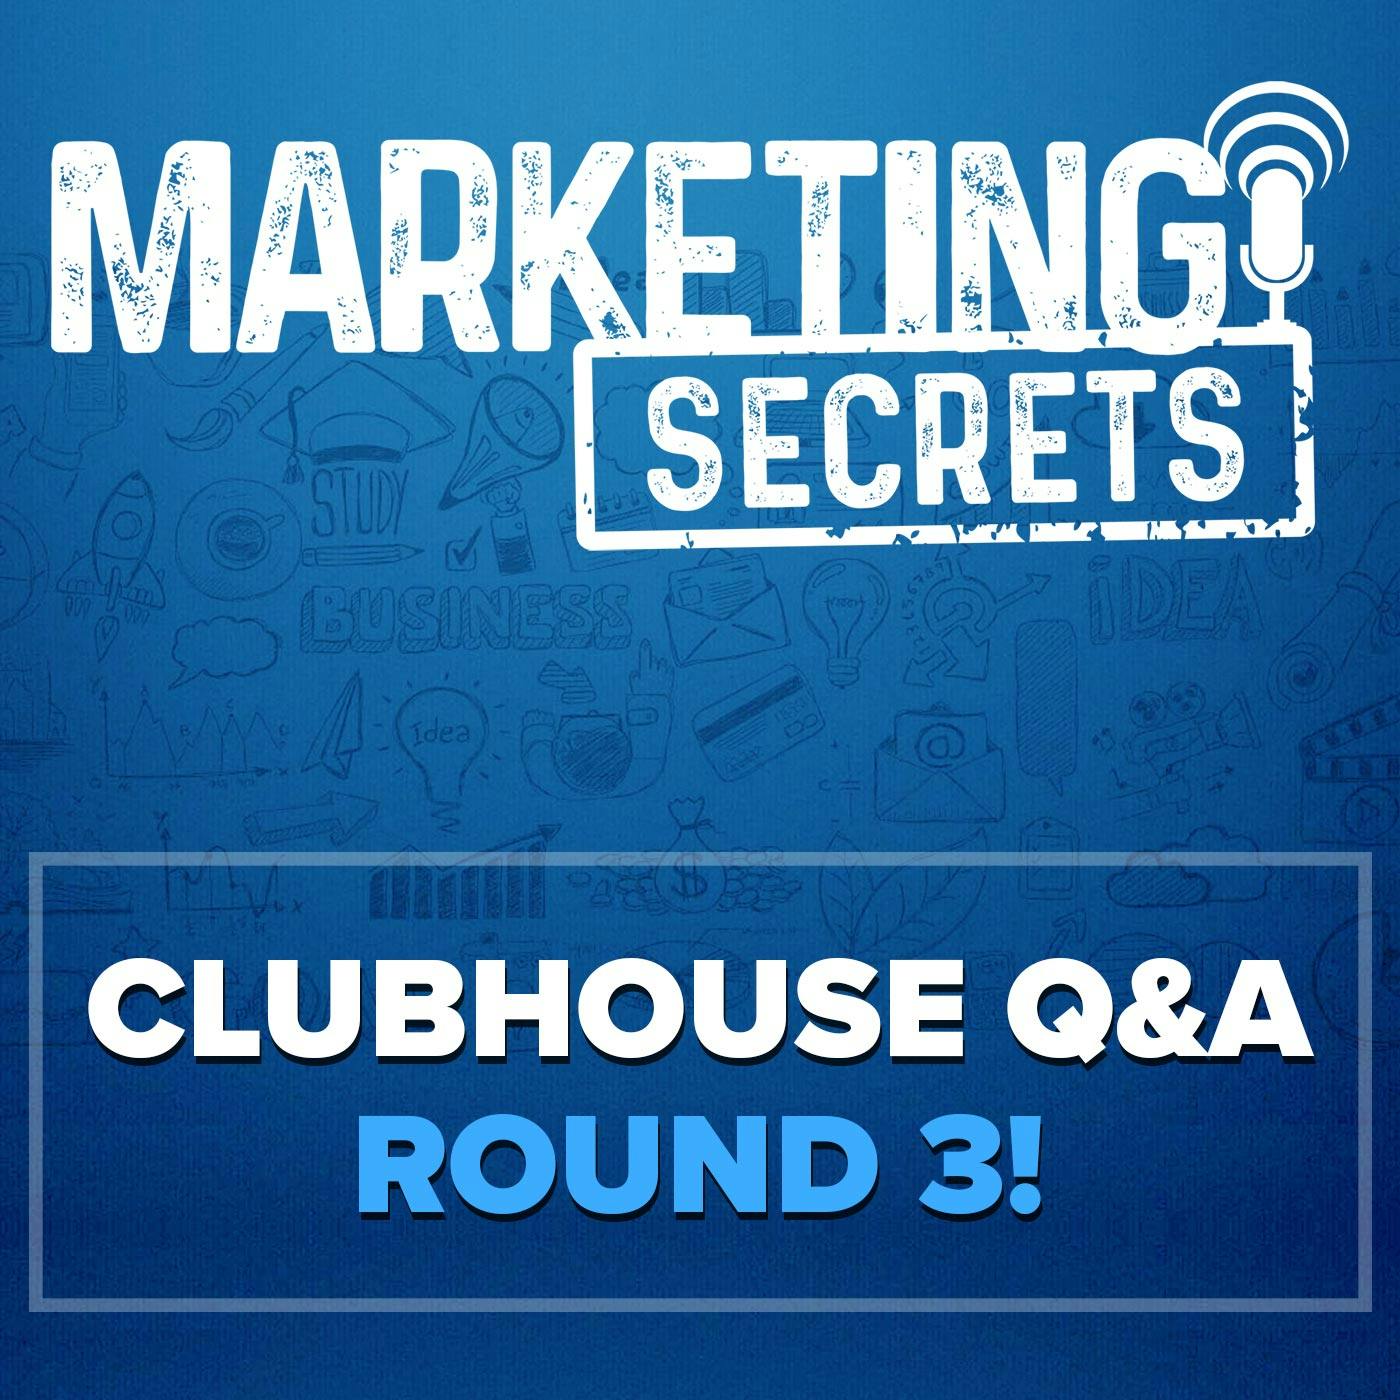 Clubhouse Q&A - Round 3!